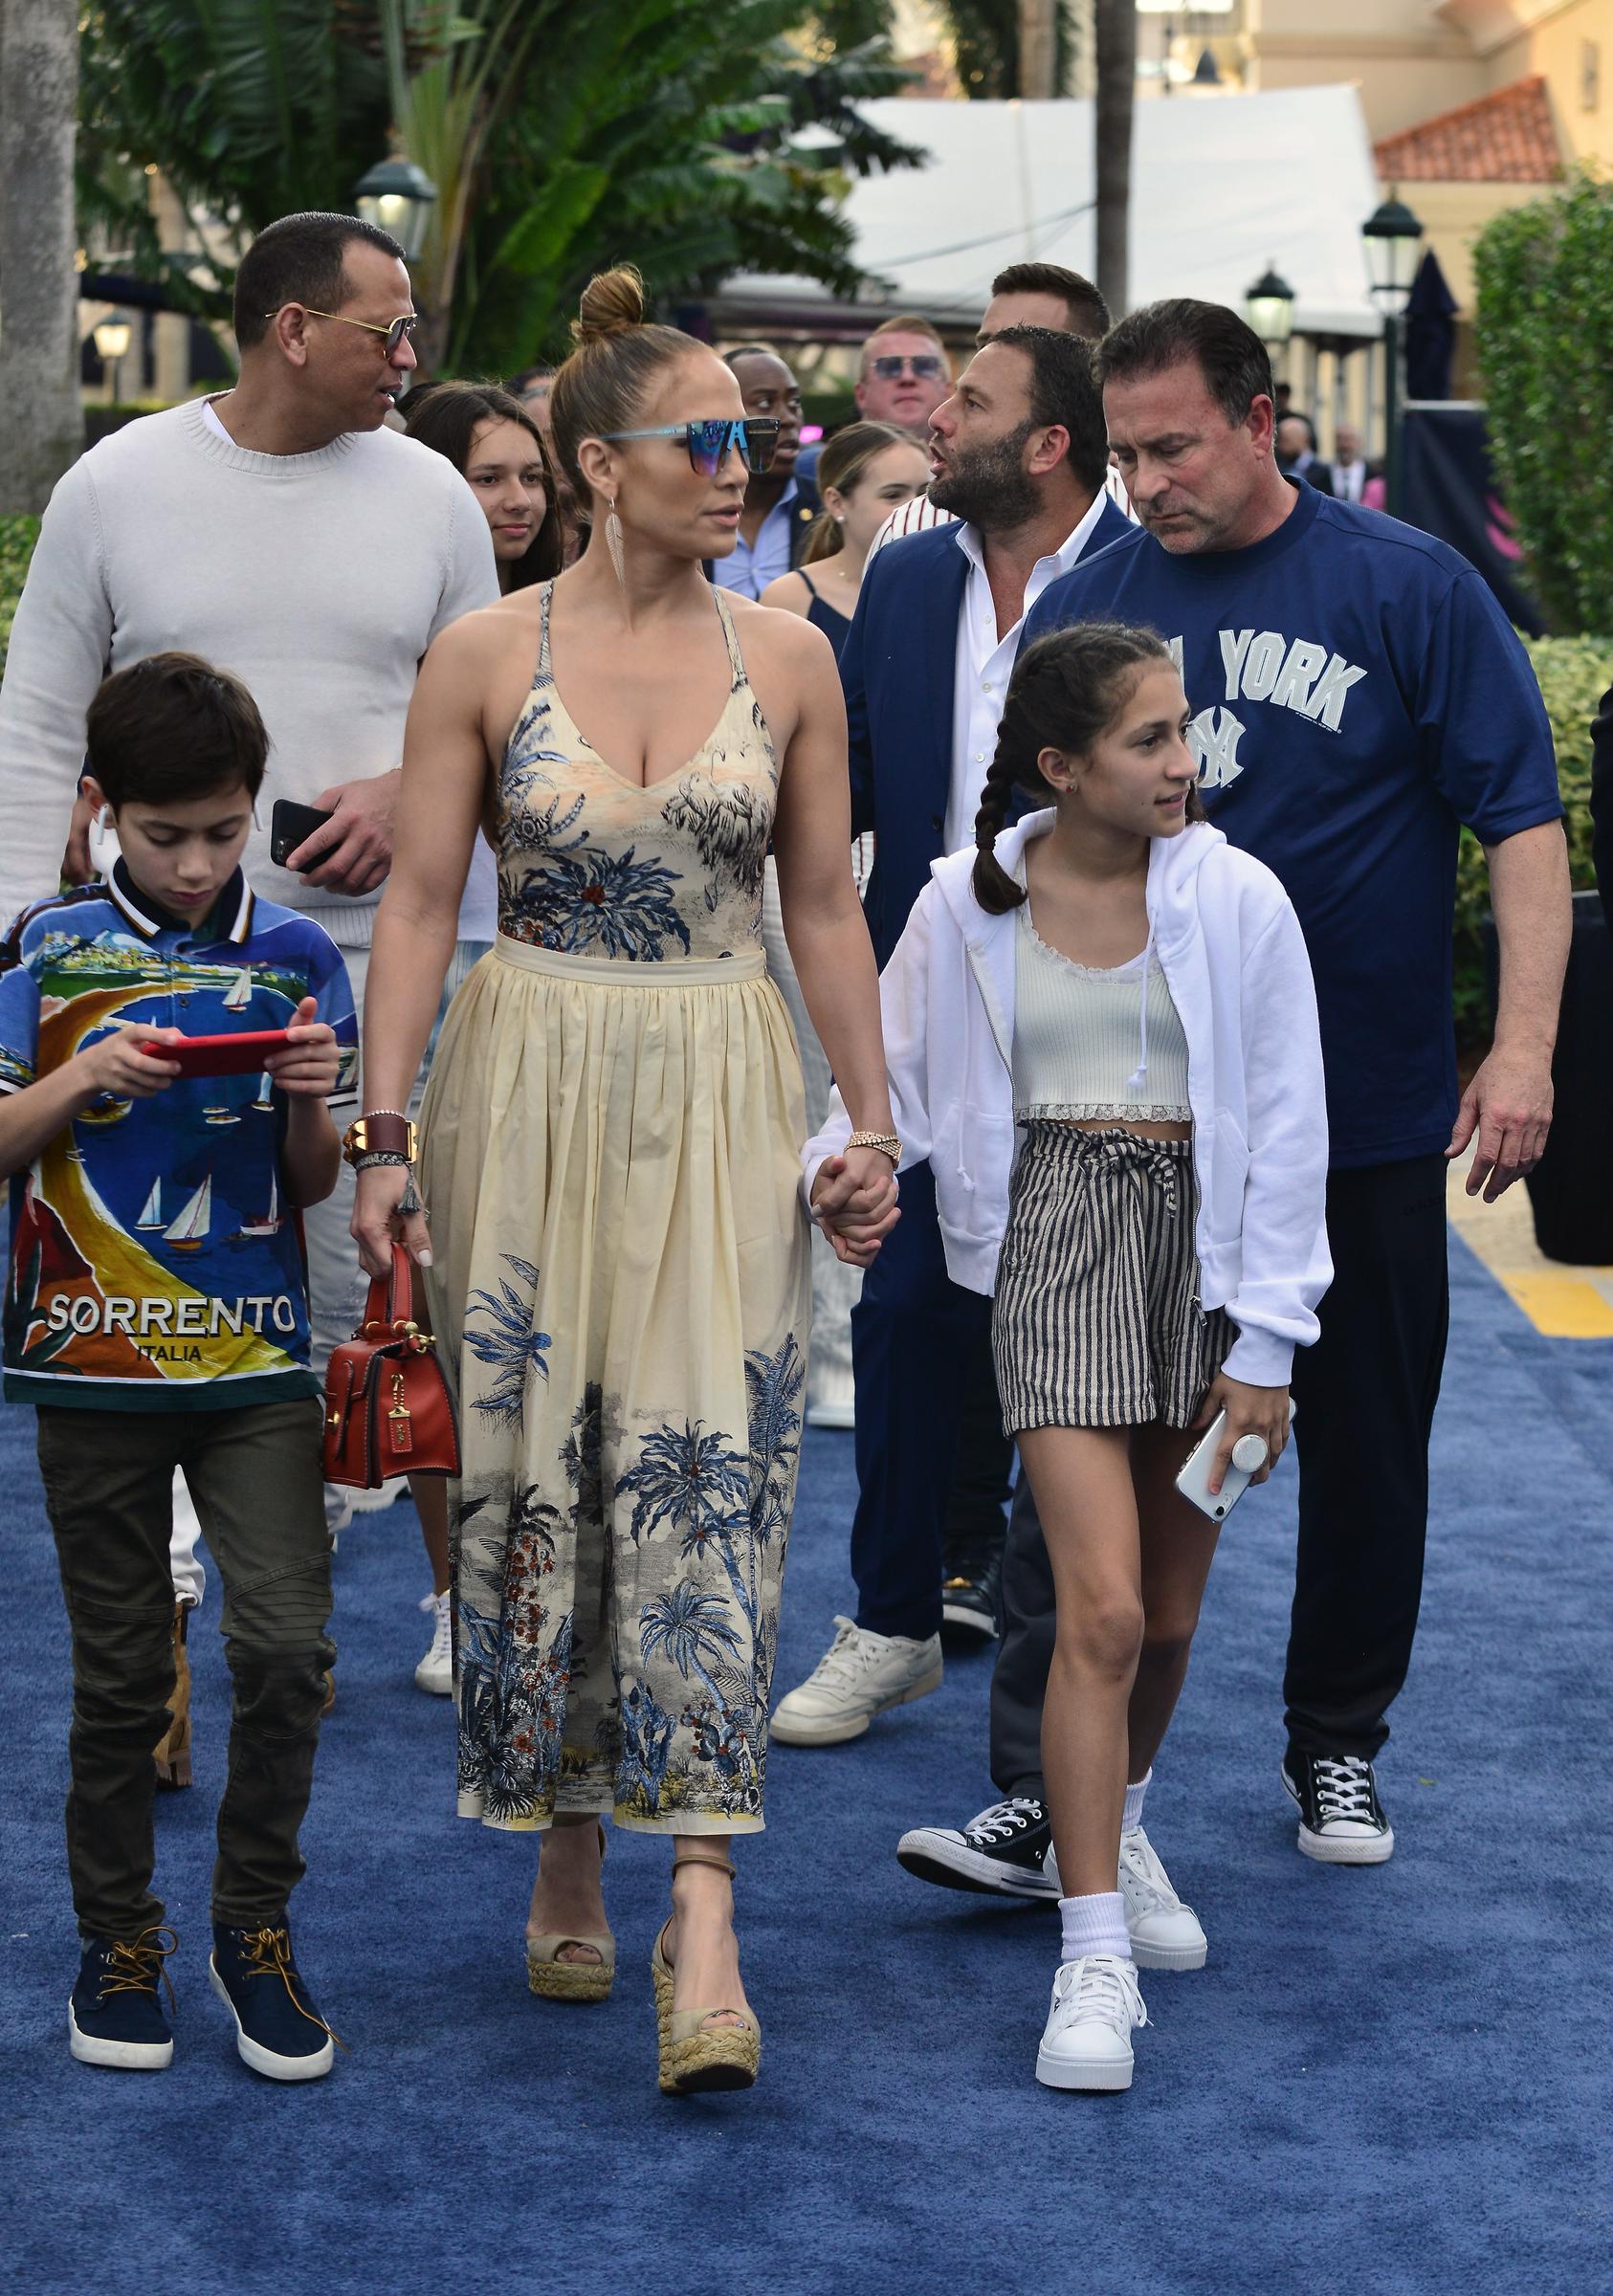 Jennifer Lopez with children Emme Maribel and Maximilian David Muñiz at the 2020 Pegasus World Cup Championship Invitational Series on January 25, 2020, in Hallandale Beach, Florida. | Source: Getty Images